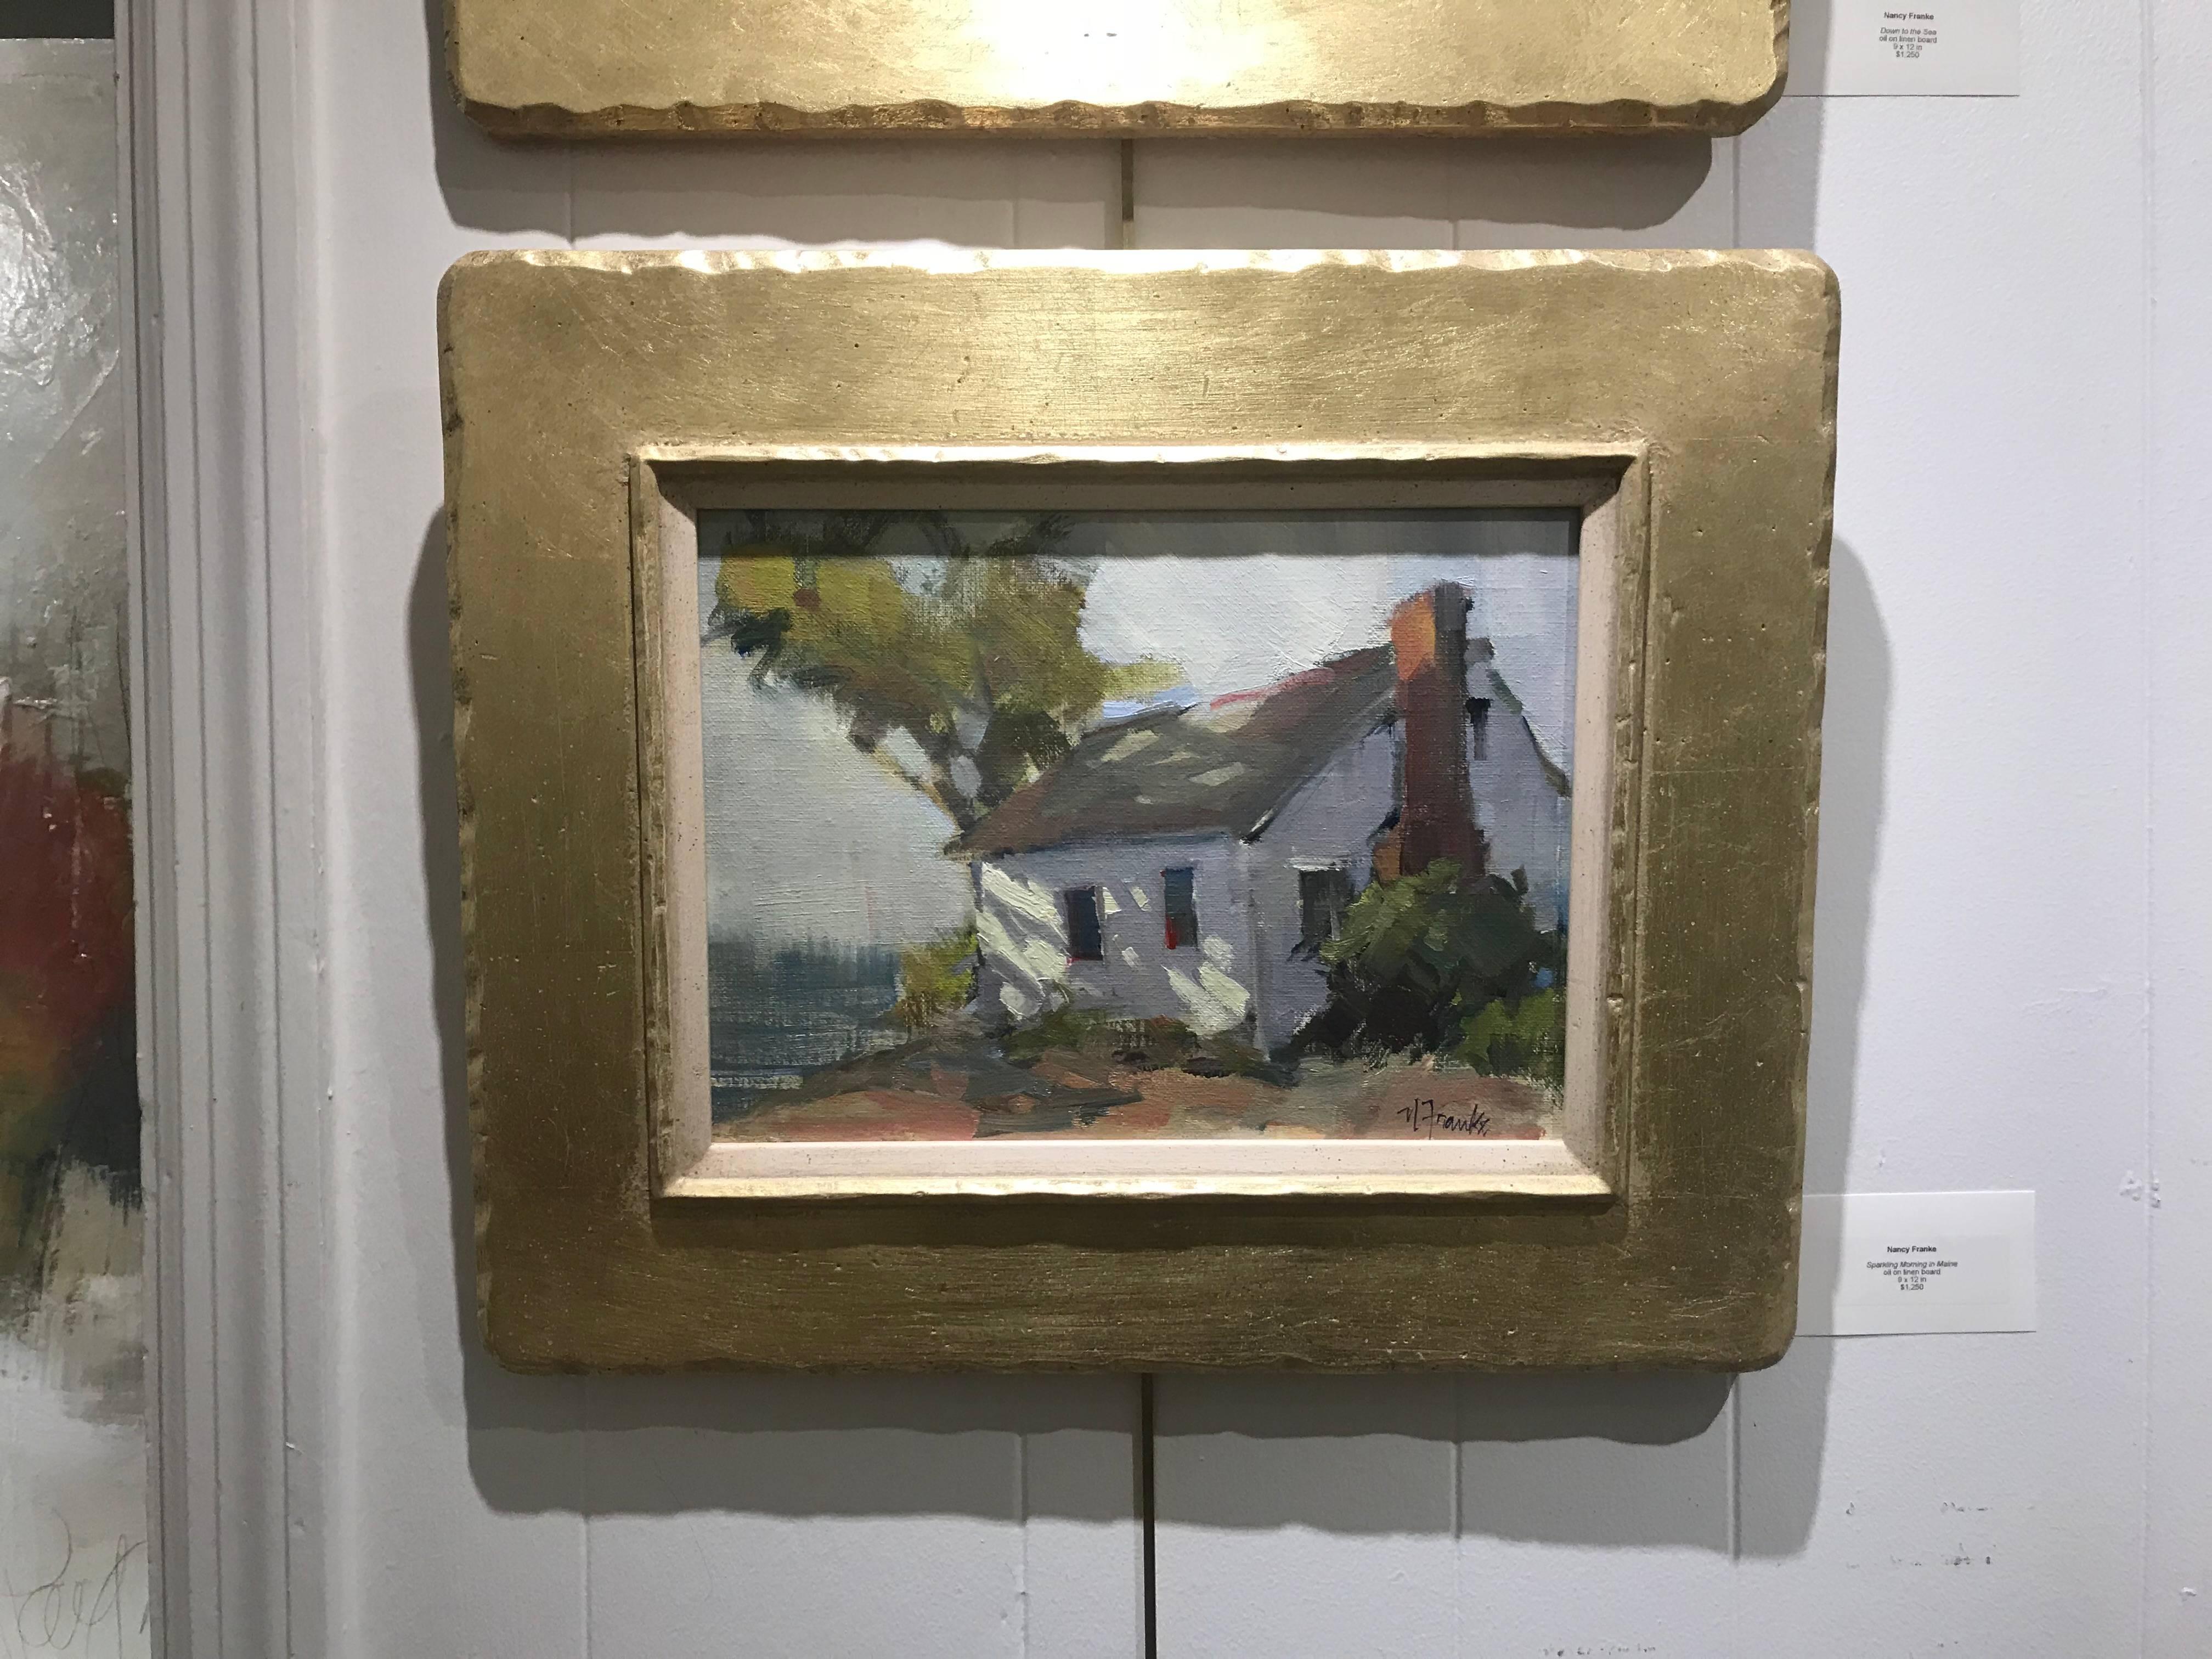 'Down to the Sea' is a framed oil on linen board painting created by American artist Nancy Franke in 2017. Set inside a handmade frame finished with 14k gold, the painting depicts a simple house with slanted roof marked with a large chimney on its